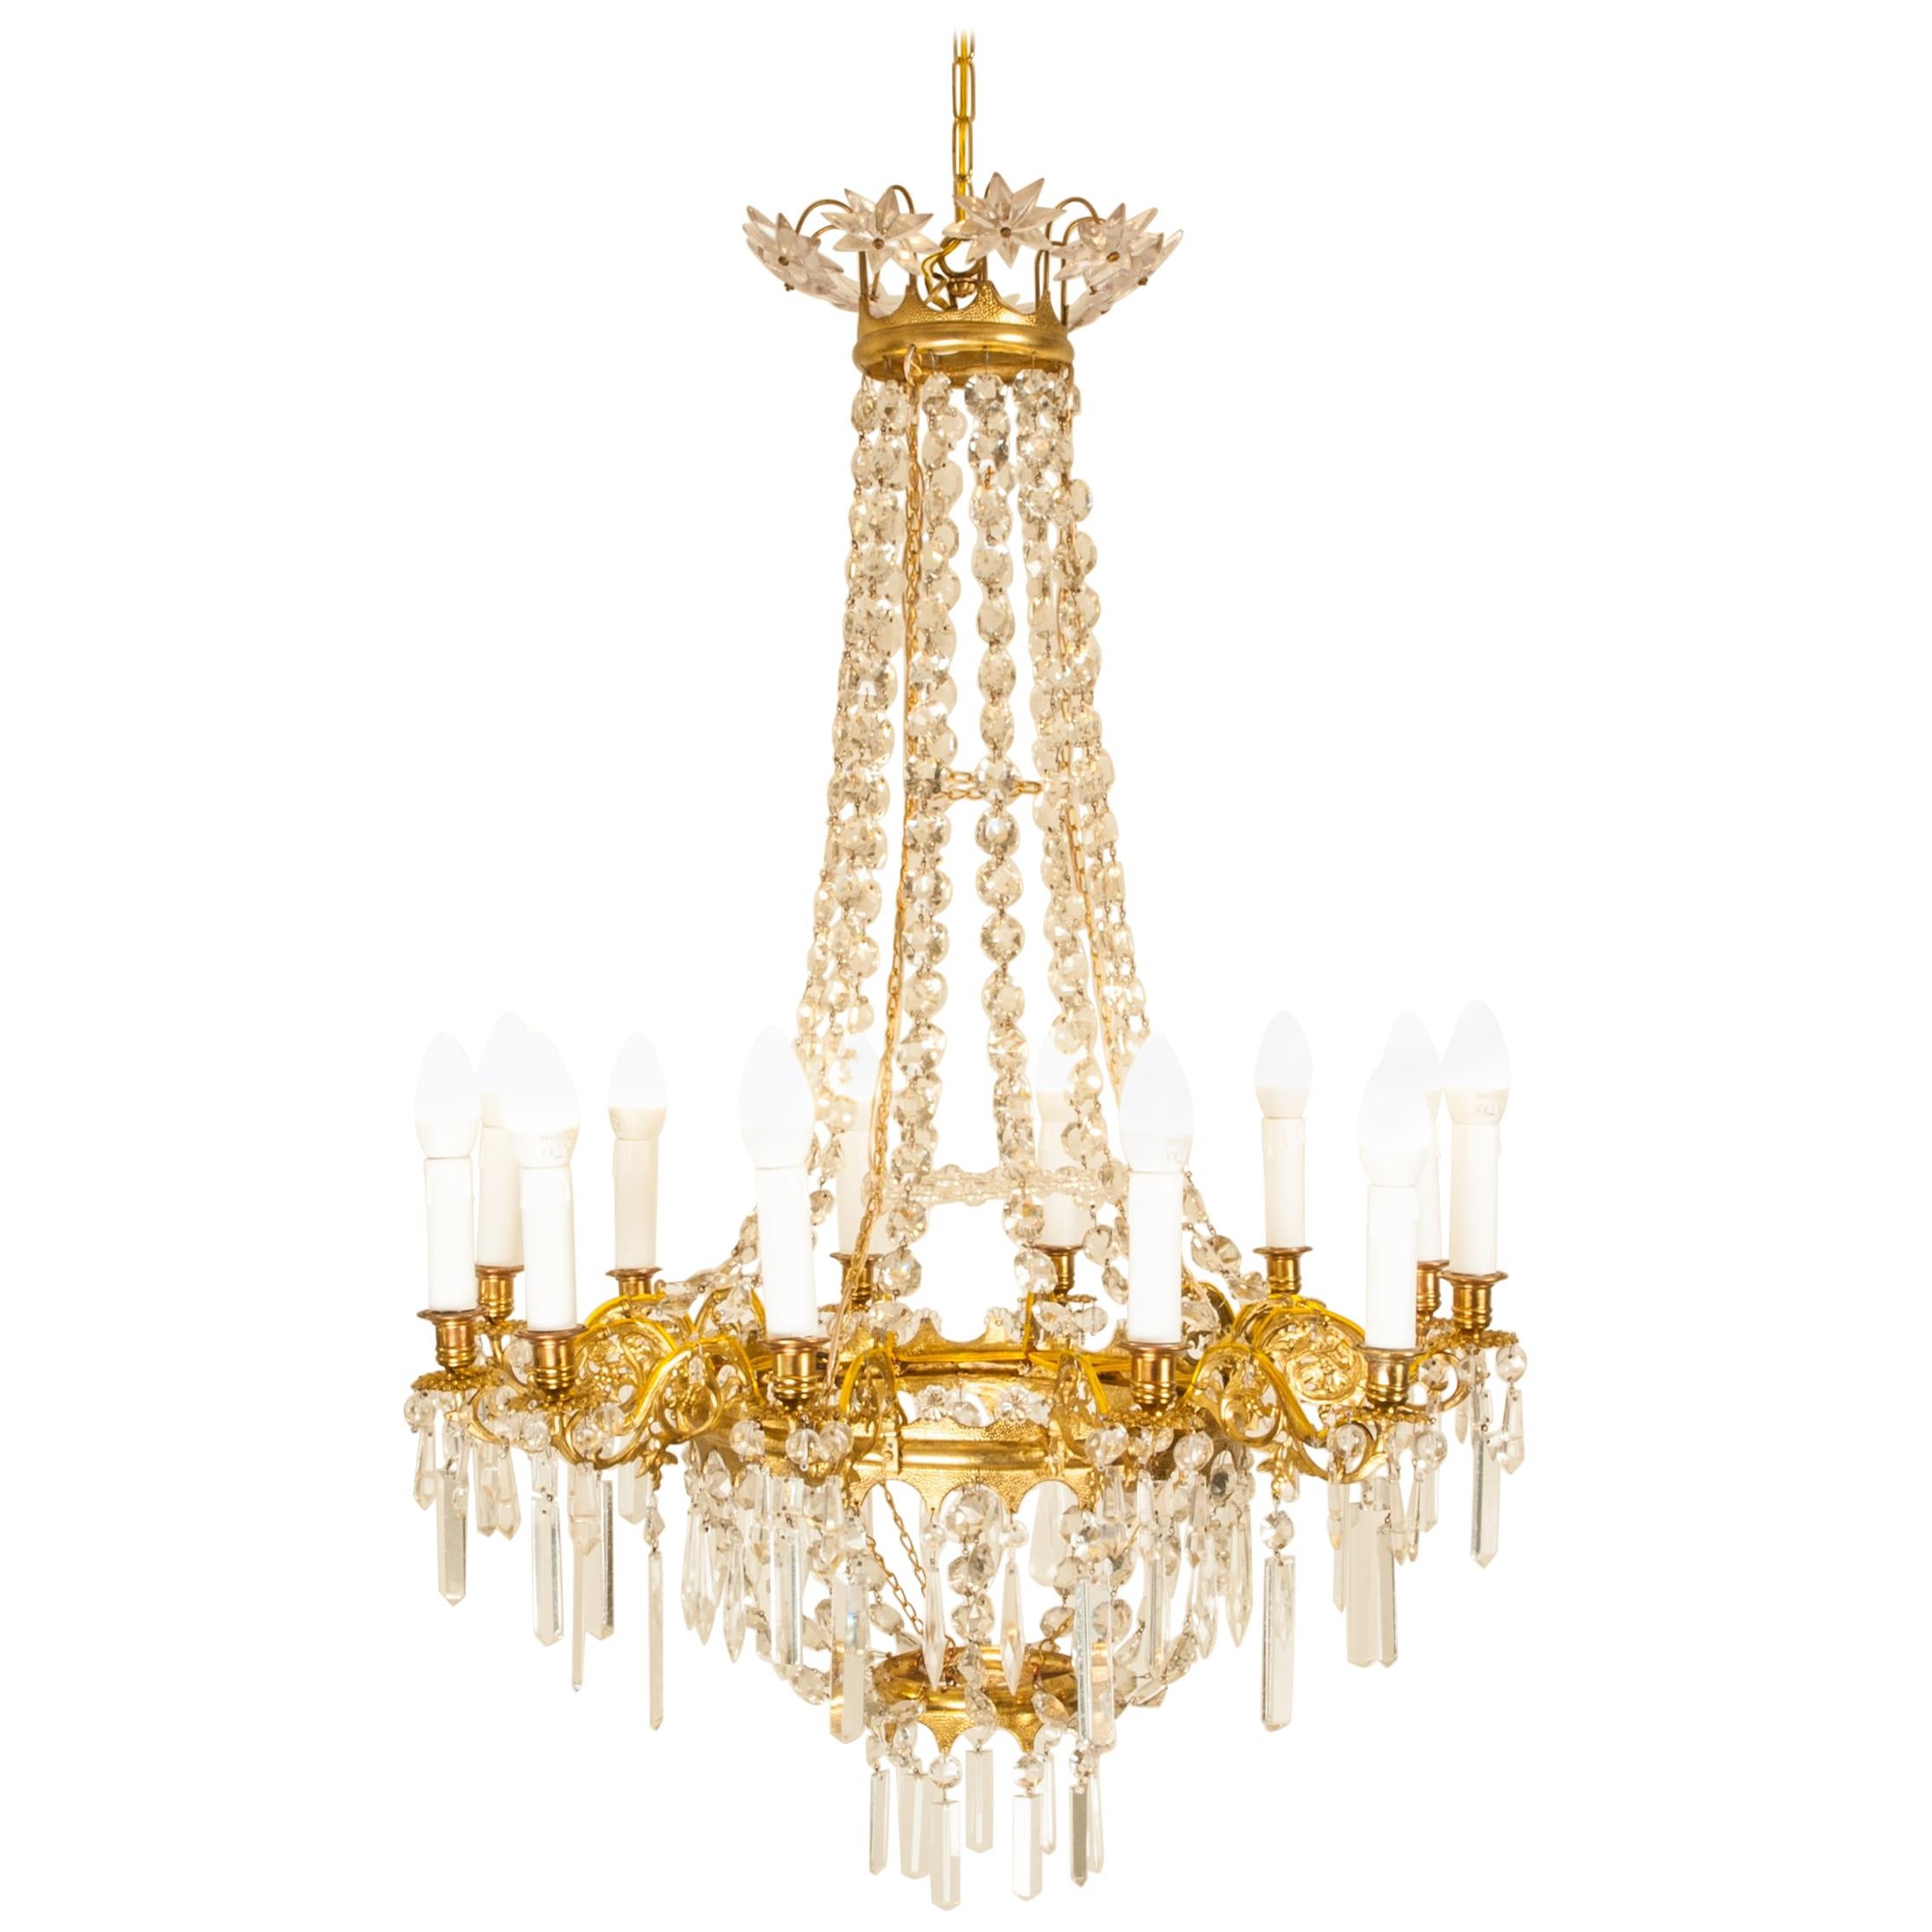 French Empire Gilt-Bronze and Hand-Cutted Crystal Chandeliert For Sale